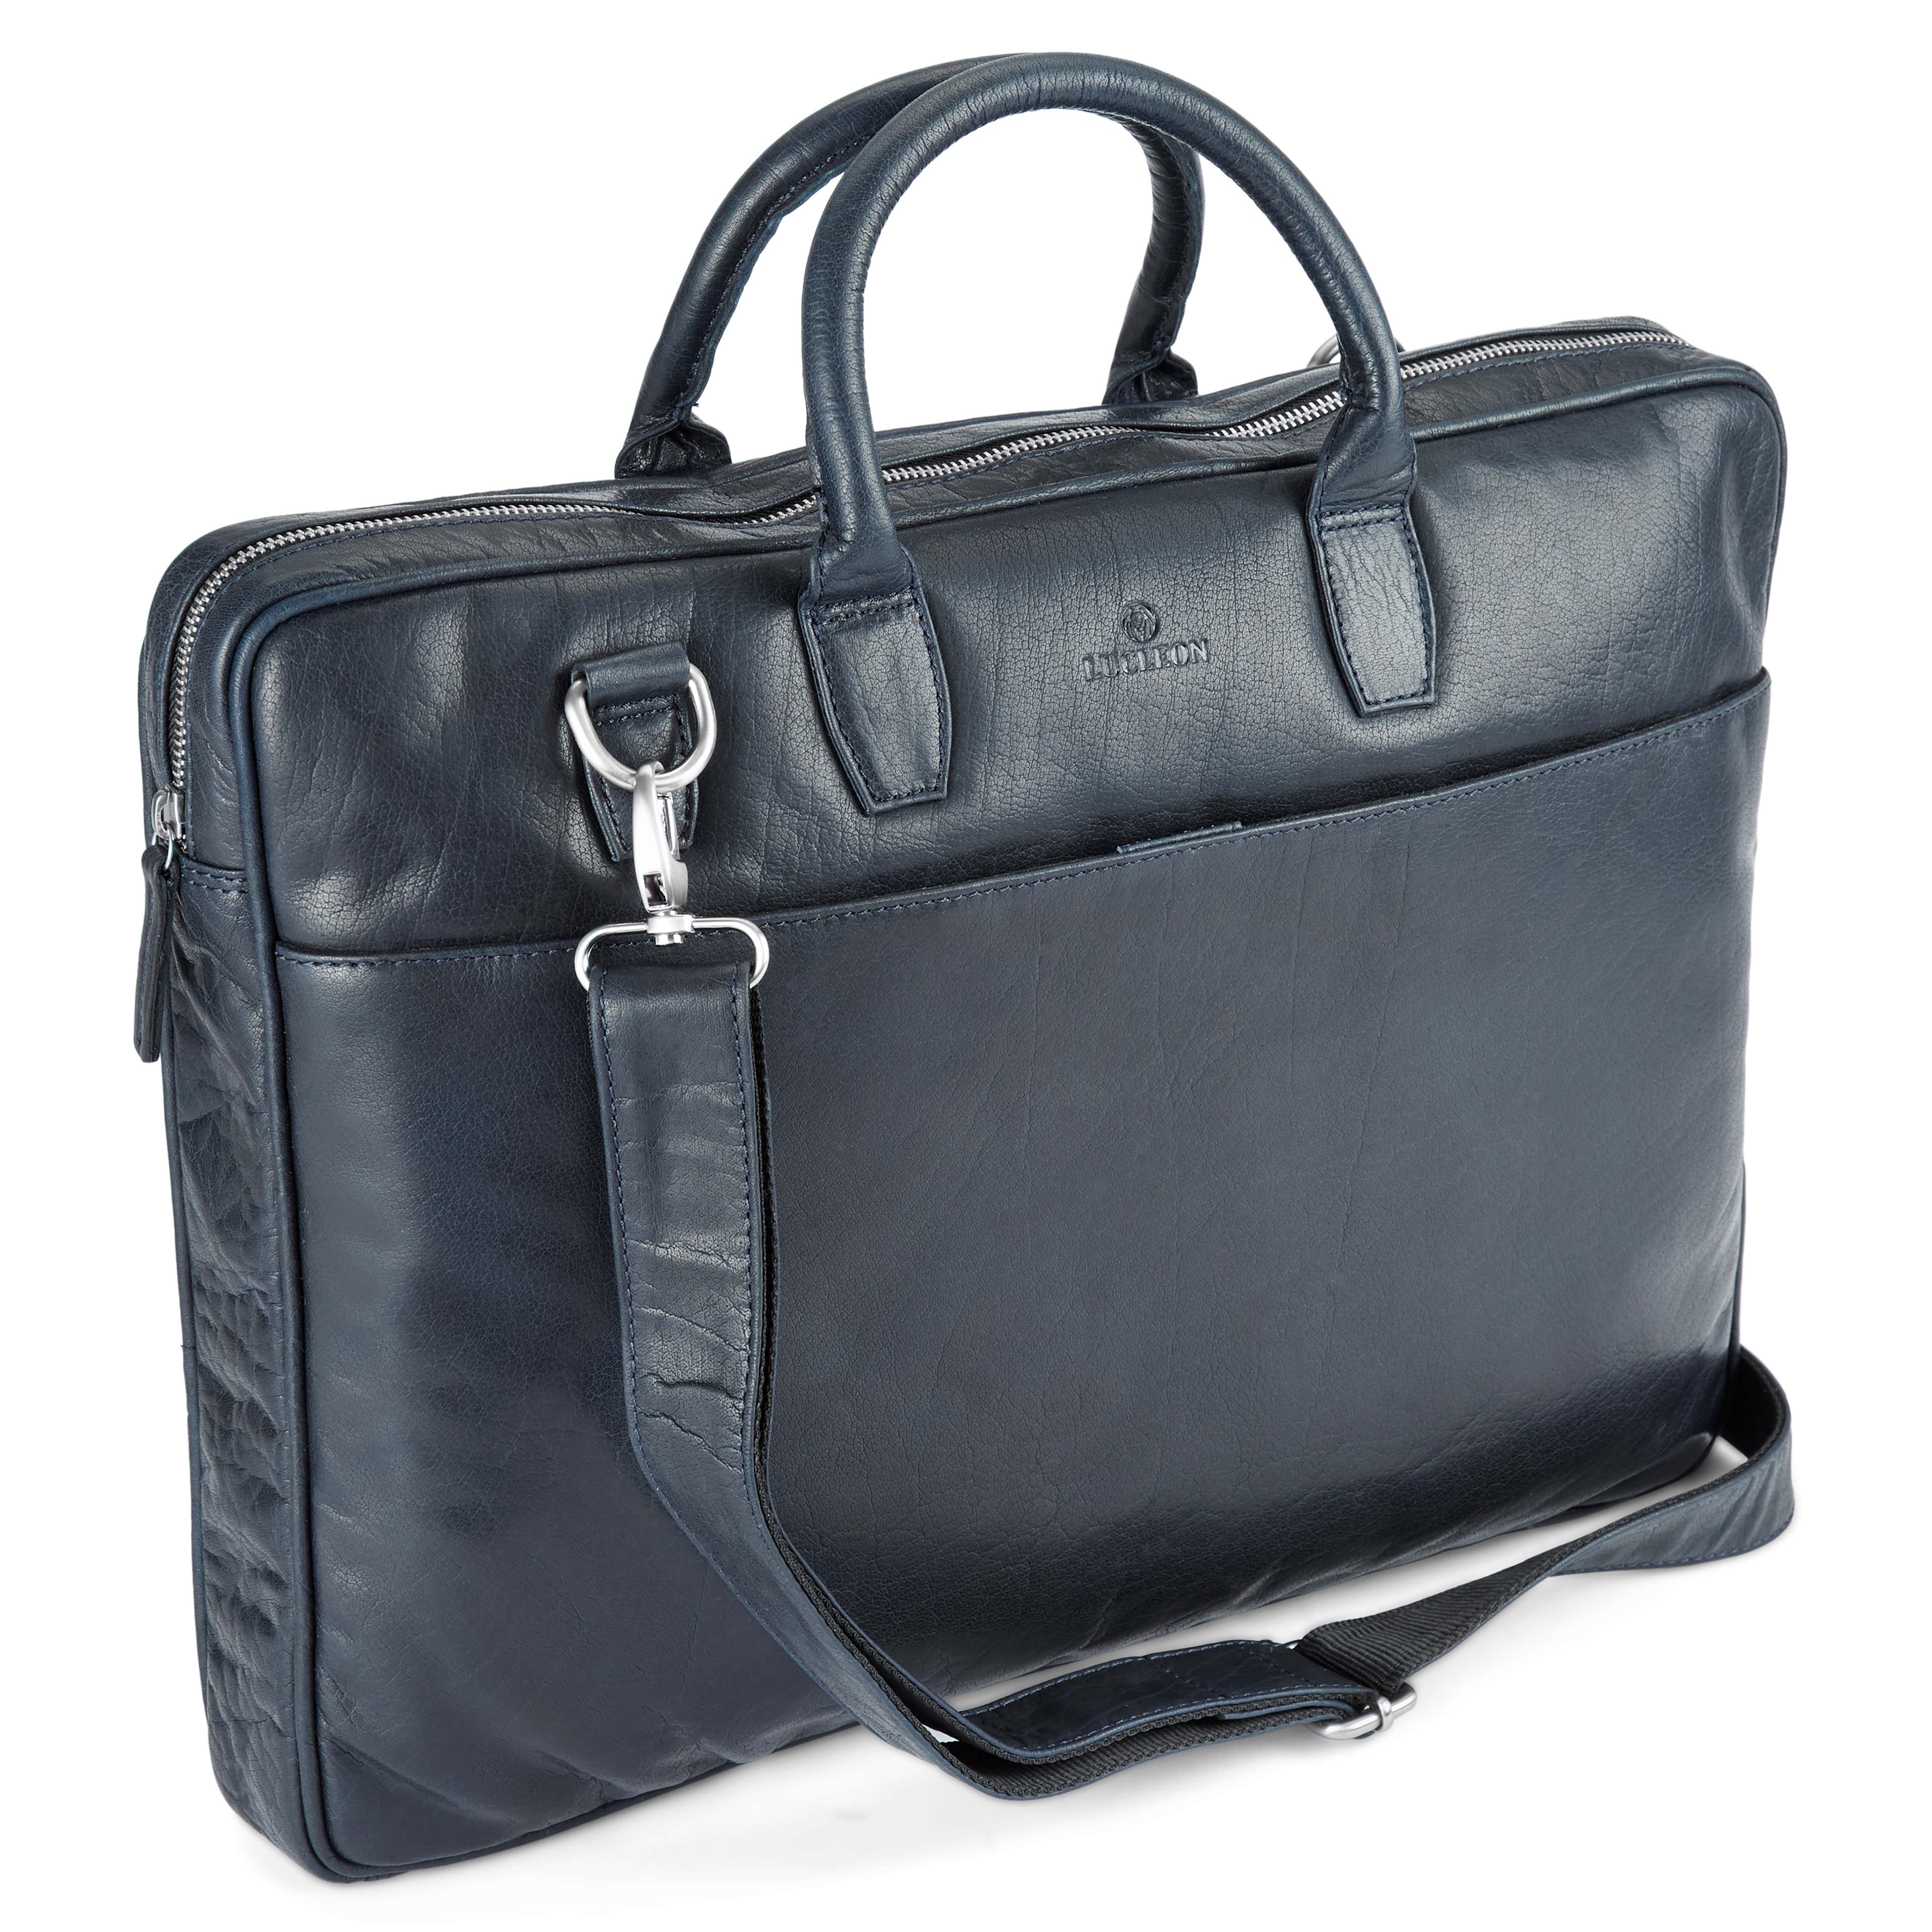 Montreal Slim 17” Executive Navy Blue Leather Bag - 6 - gallery